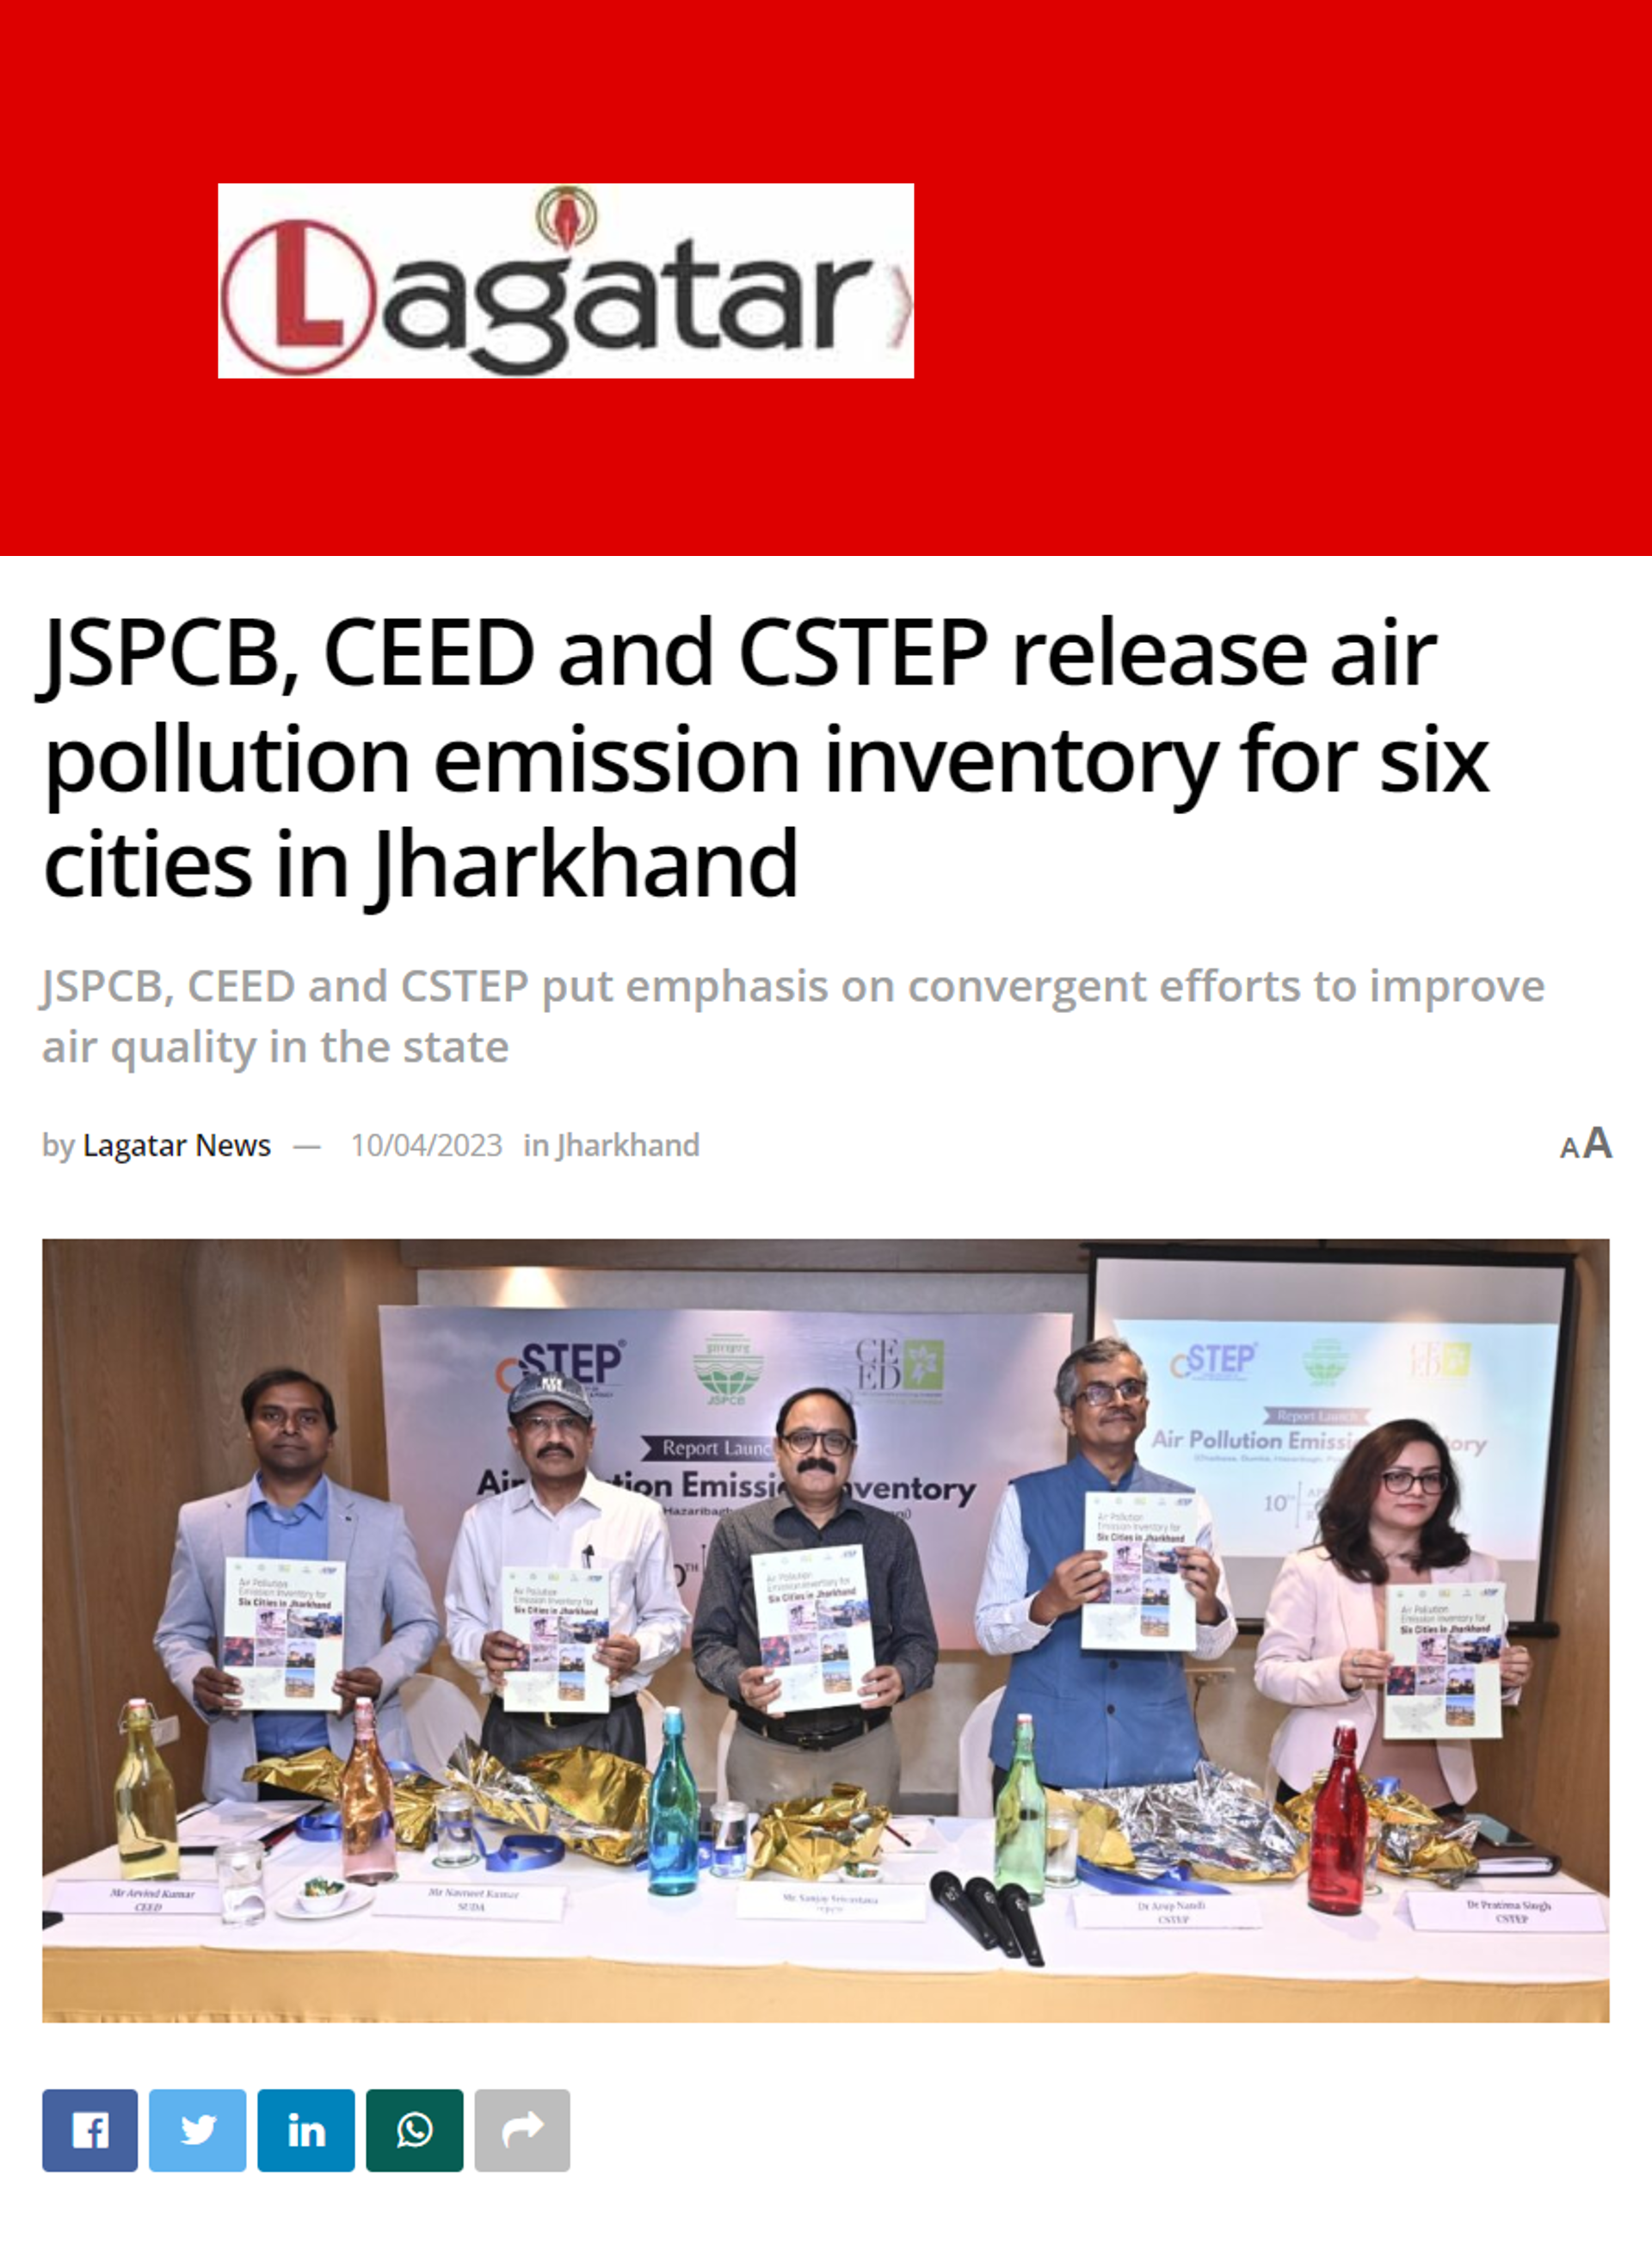 CSTEP’s emission inventory study for Jharkhand featured in Lagatar